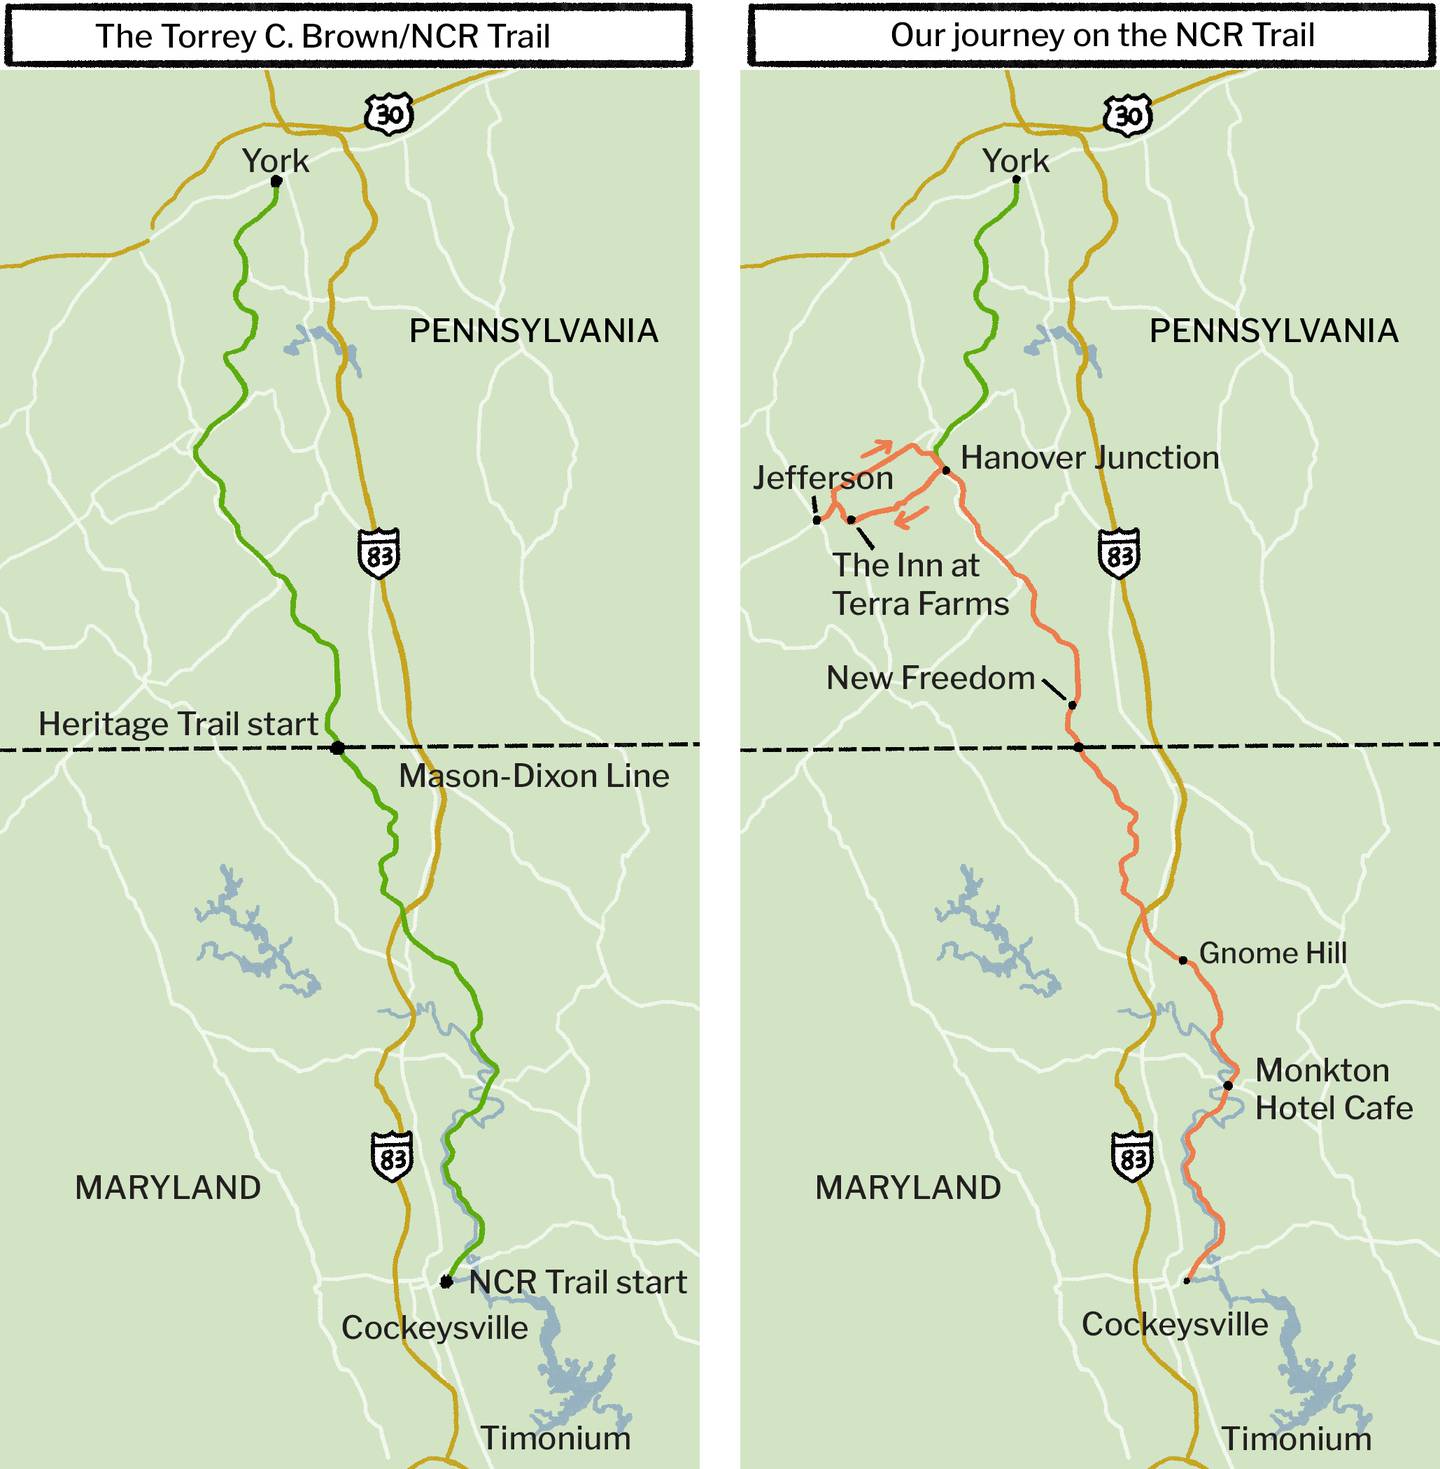 Two illustrated maps side by side show the Torrey C. Brown rail trail starting in Cockeysville, Maryland and heading north to York, Pennsylvania, crossing over I-83 and the Mason-Dixon Line. Second map shows in red a path up the trail from Cockeysville to Hanover Junction and Jefferson, Pennsylvania.